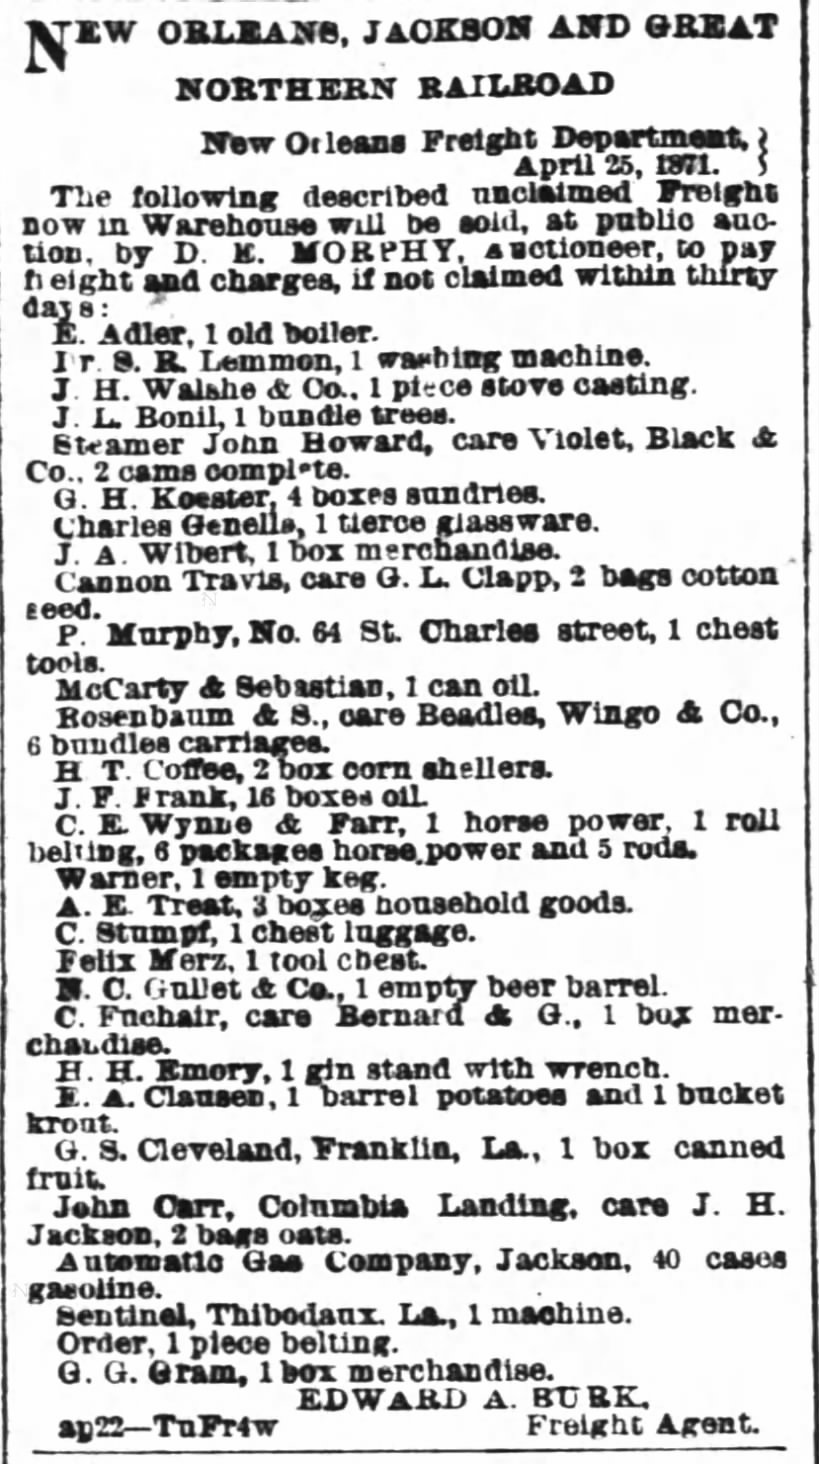 The Times-Picayune (New Orleans, LA) May 7, 1871. A.E. Treat